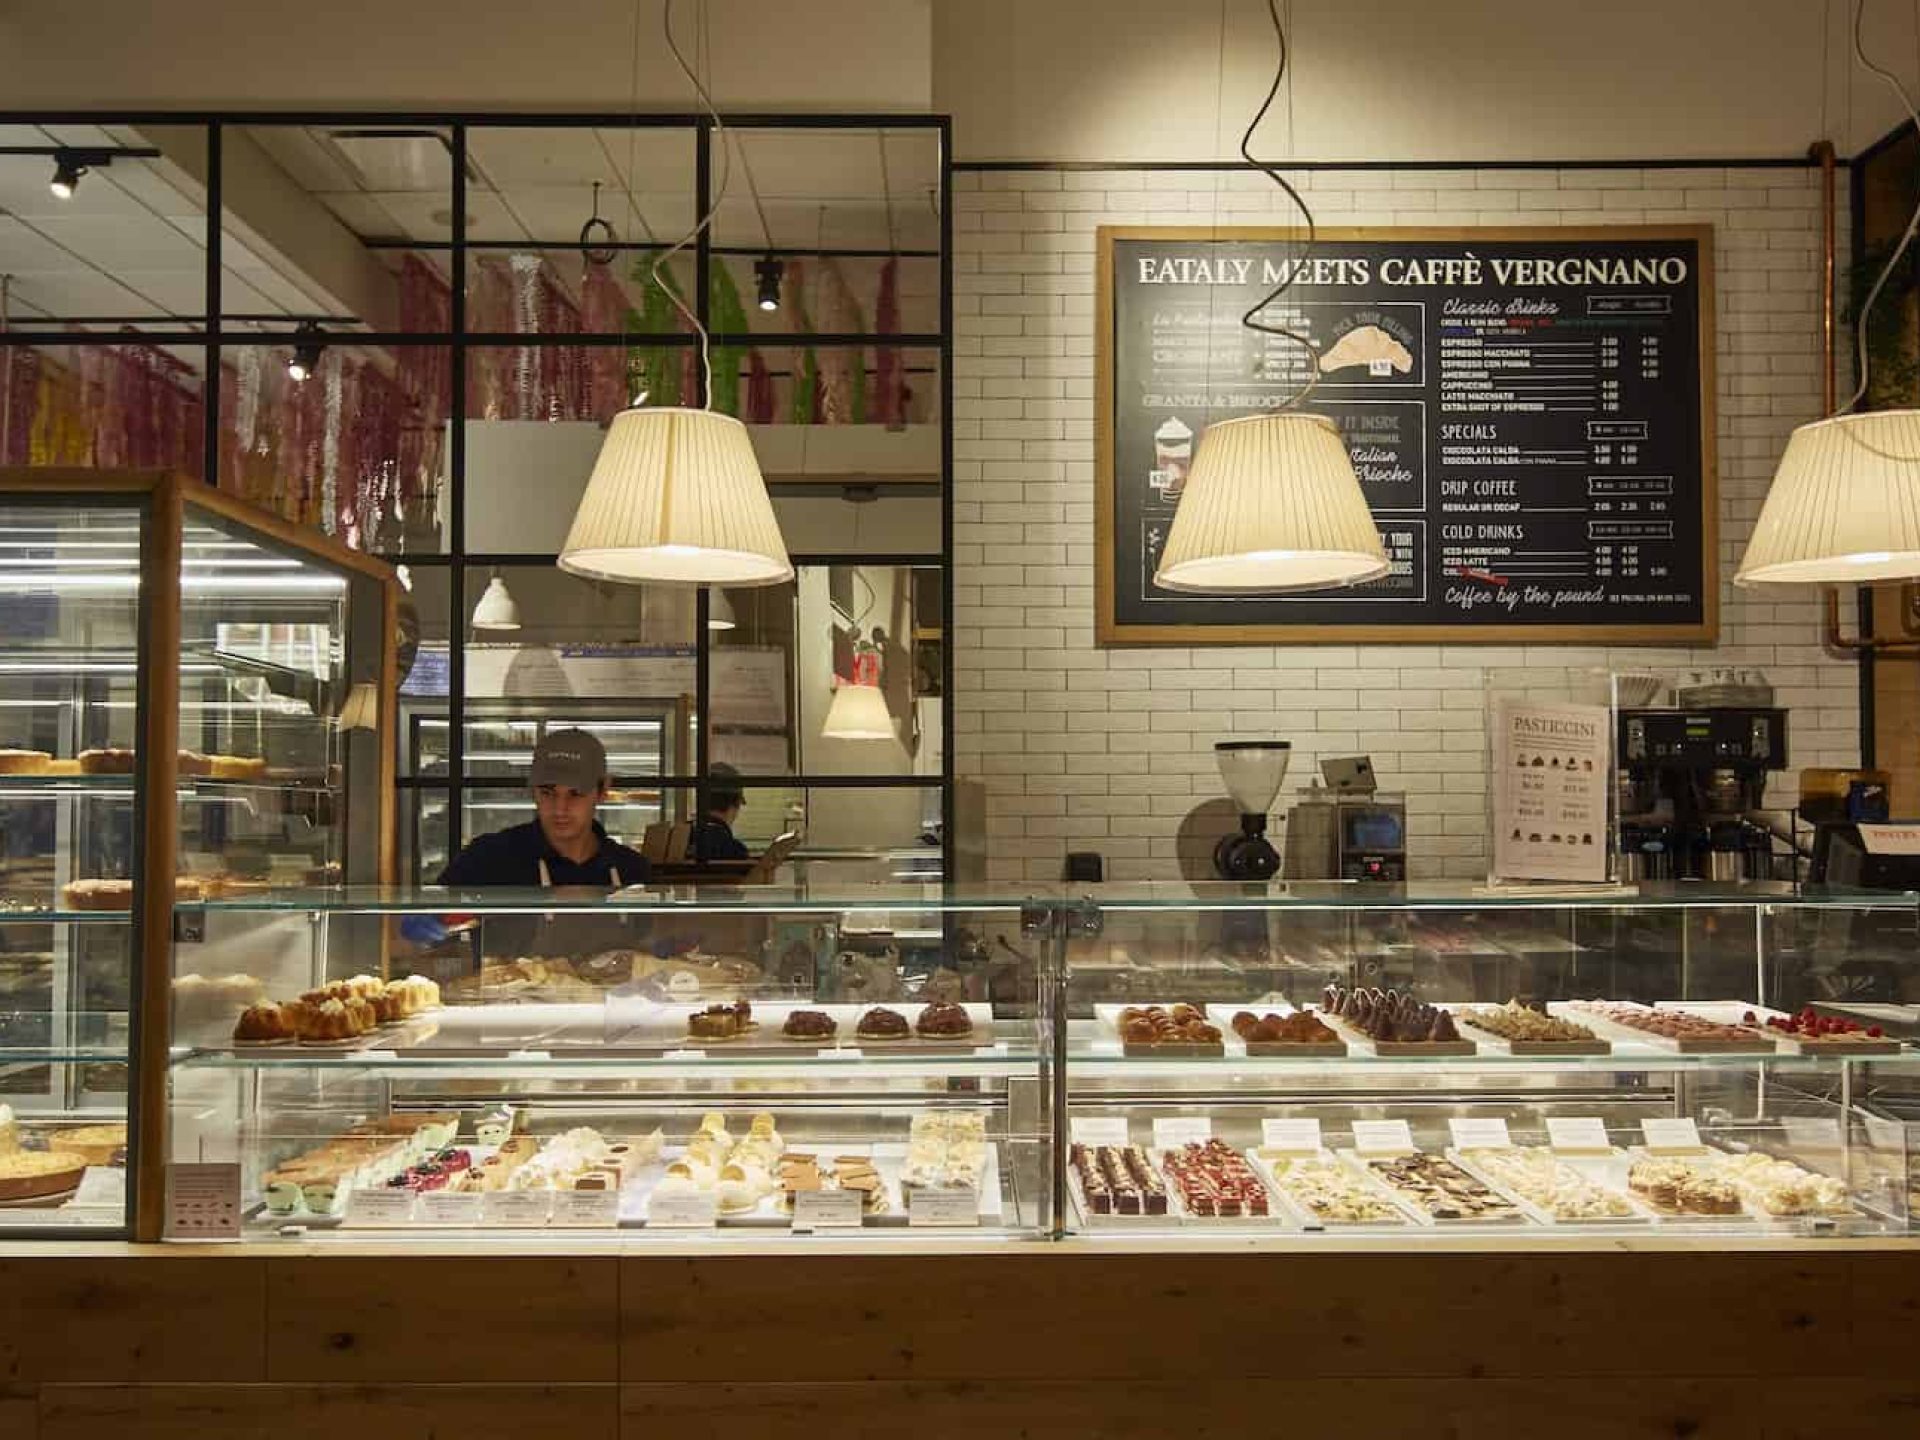 Glass display case filled with pastries and counter in Eataly Market with coffee makers and employees in the background.